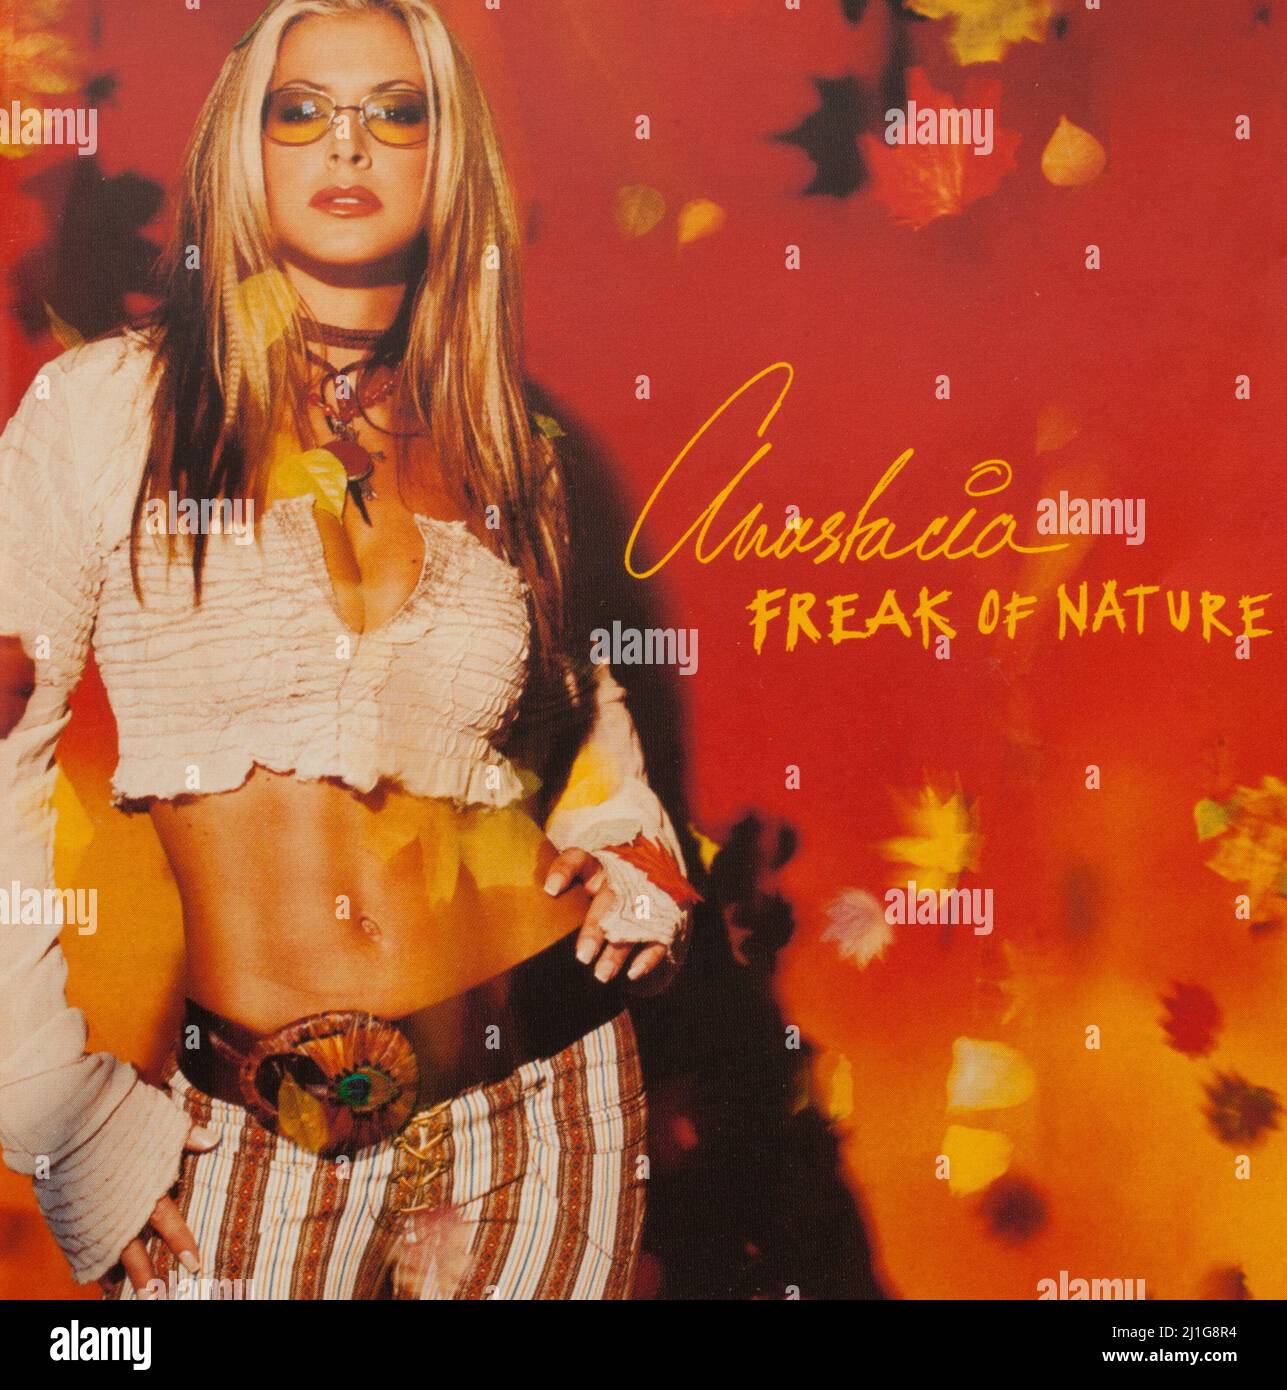 The Cd album cover to Freak of nature by Anastacia Stock Photo